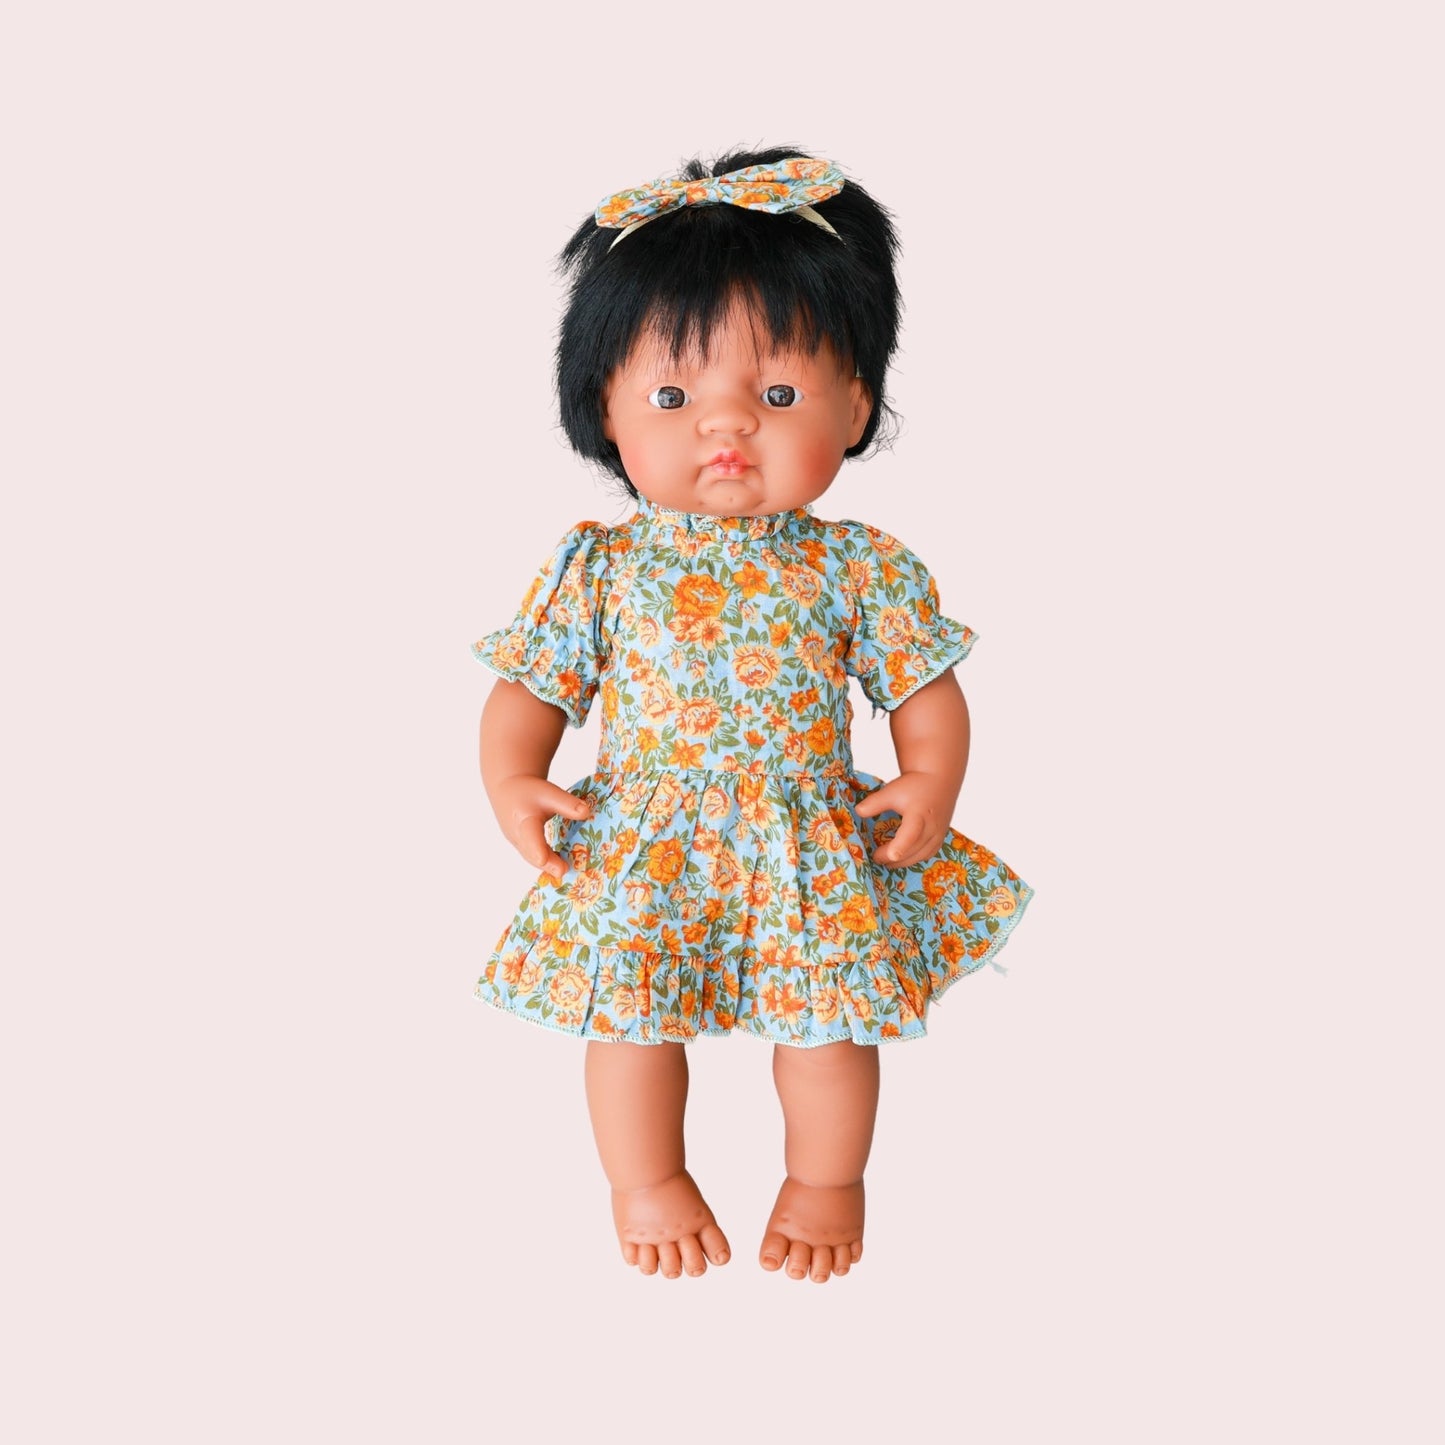 SHARLAYLA FRILL DRESS FOR DOLL - Toots Kids